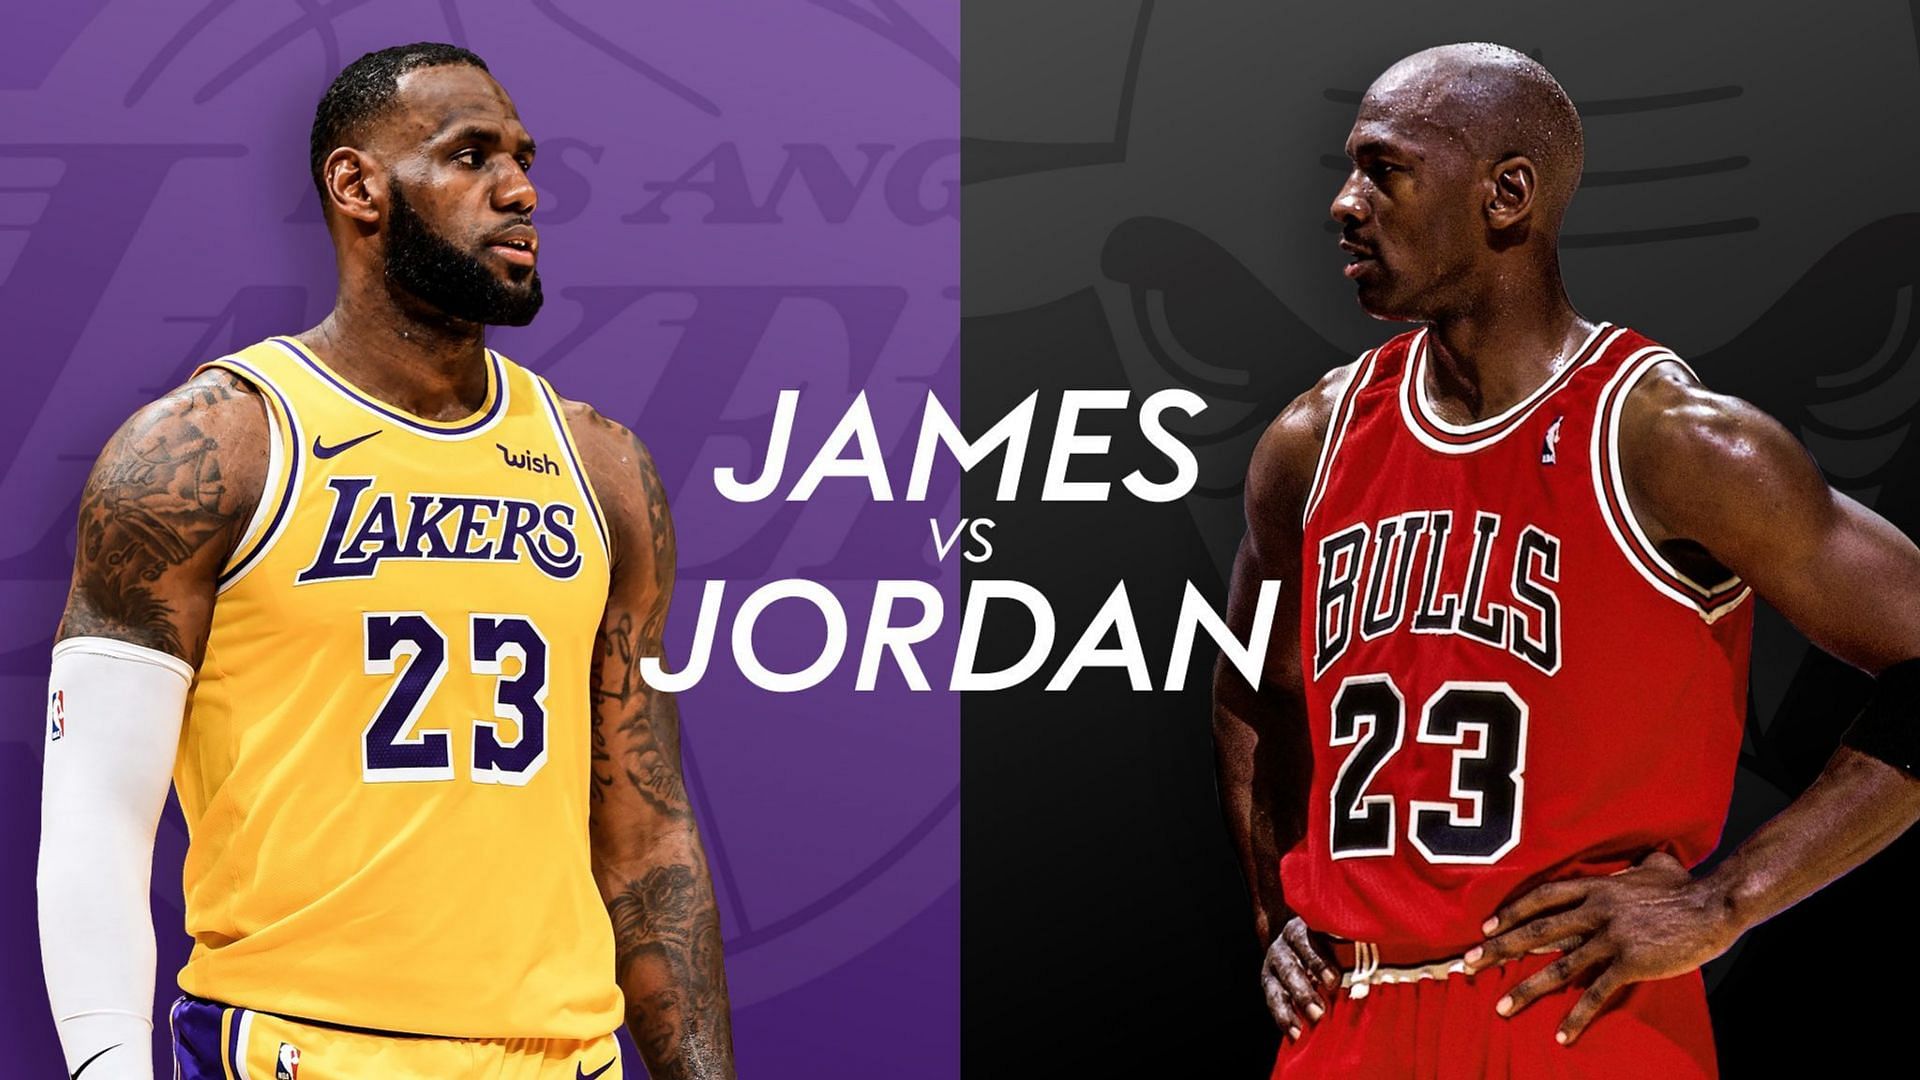 The Greatest of All-Time debate takes an unexpetec twist after the star-studded LA Lakers&#039; humiliating season. [Photo: Sky Sports]